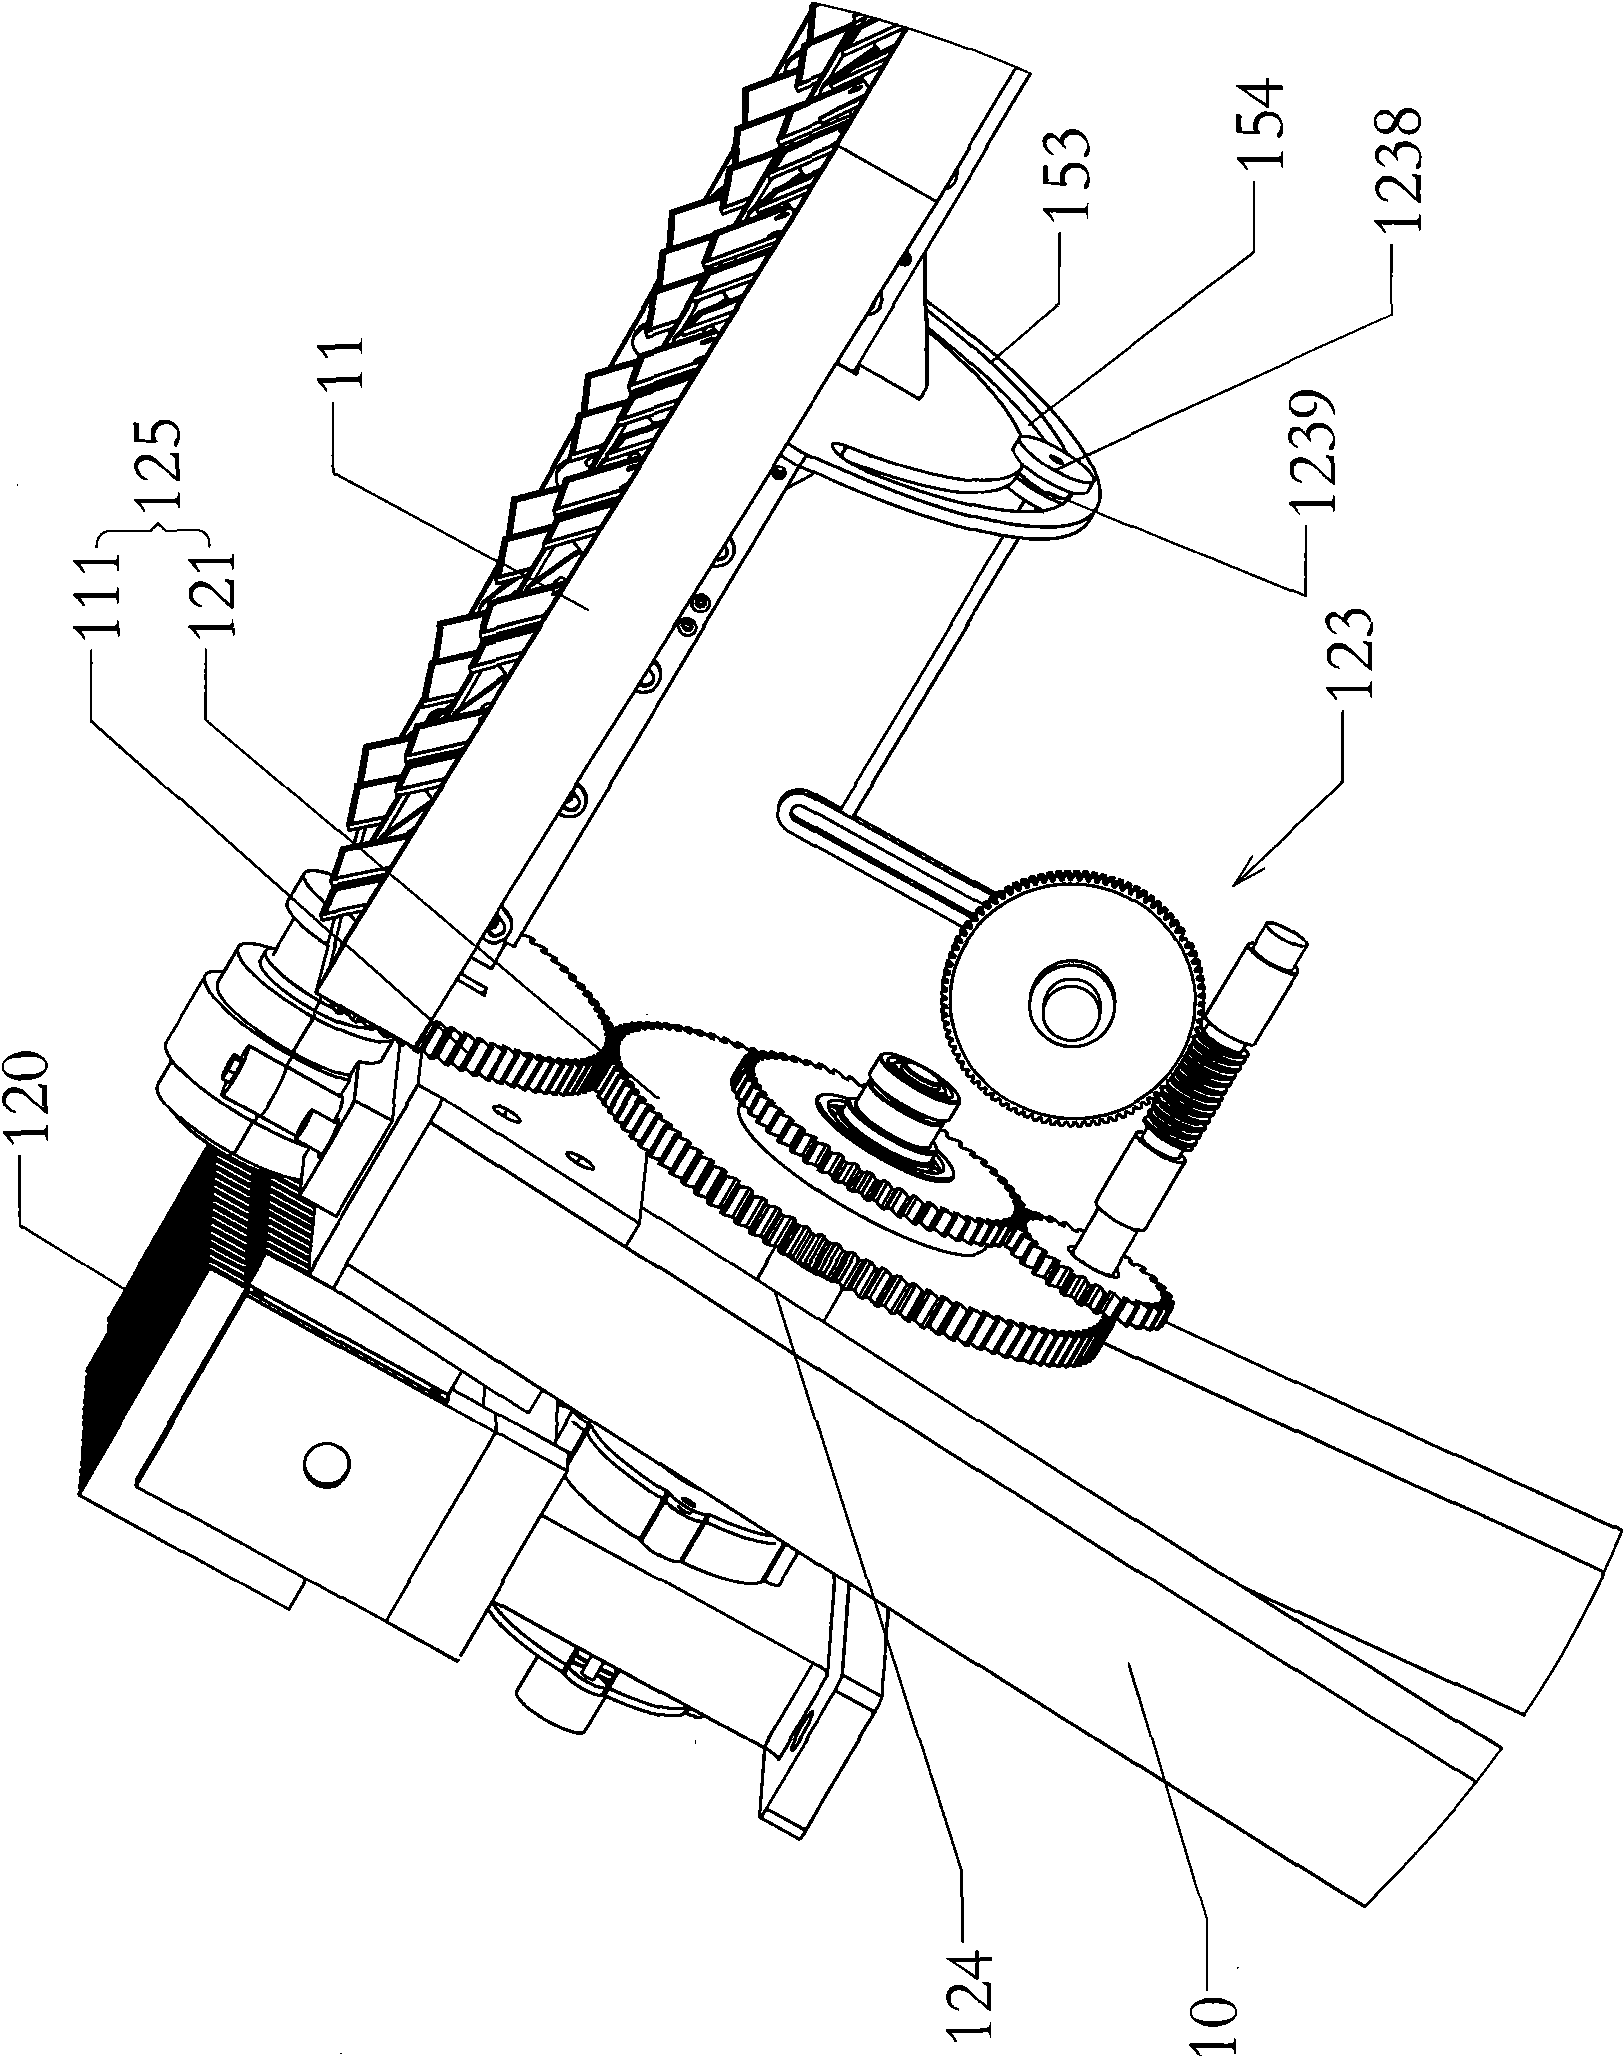 Solar tracking device for solar collector